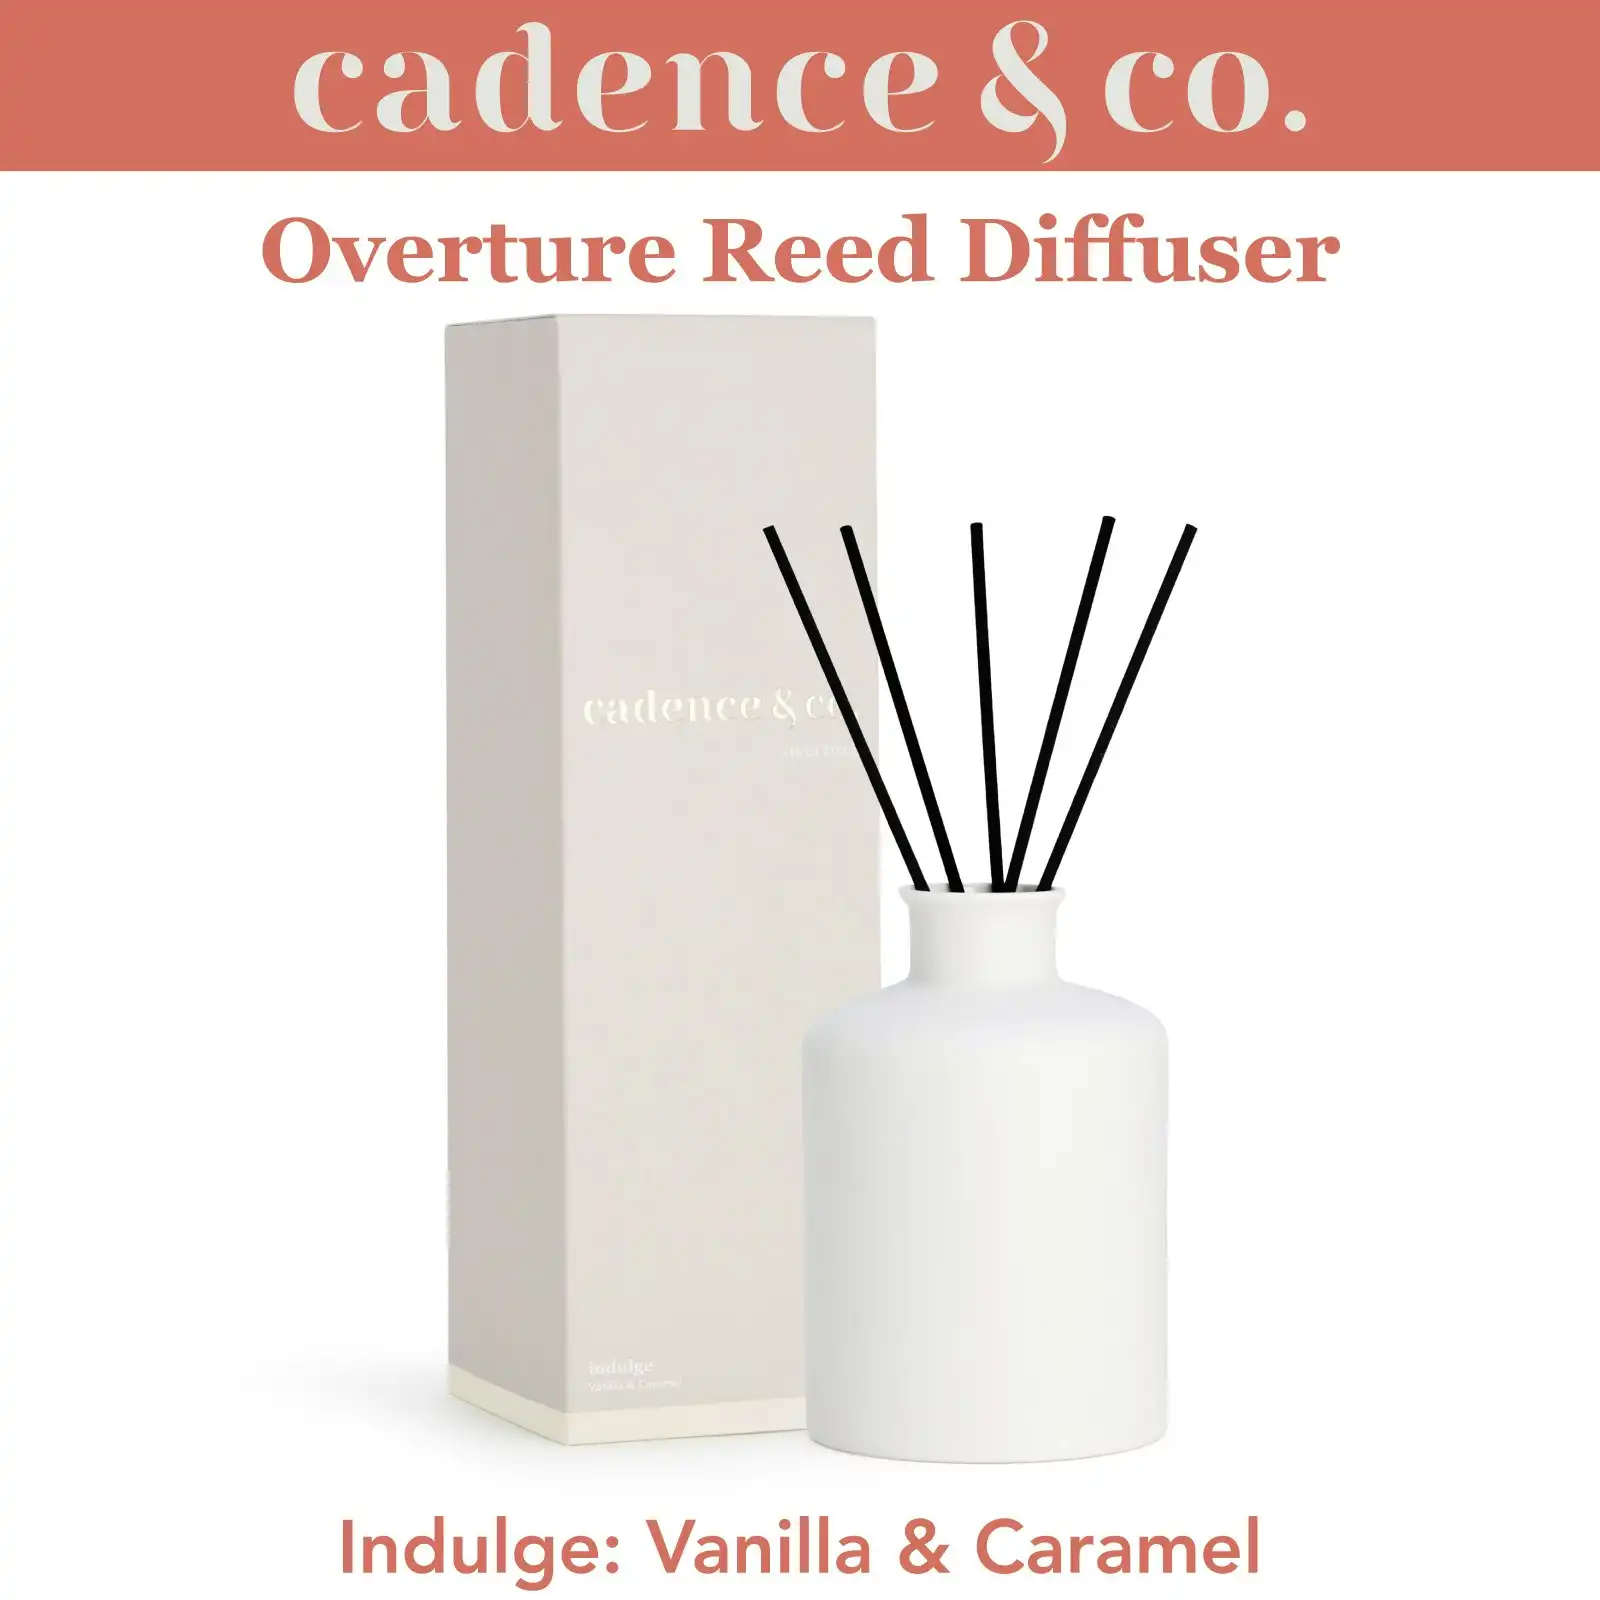 Cadence & Co Overture Reed Diffuser Indulge: Vanilla & Caramel Natural Room Freshener w/ Essential Oils